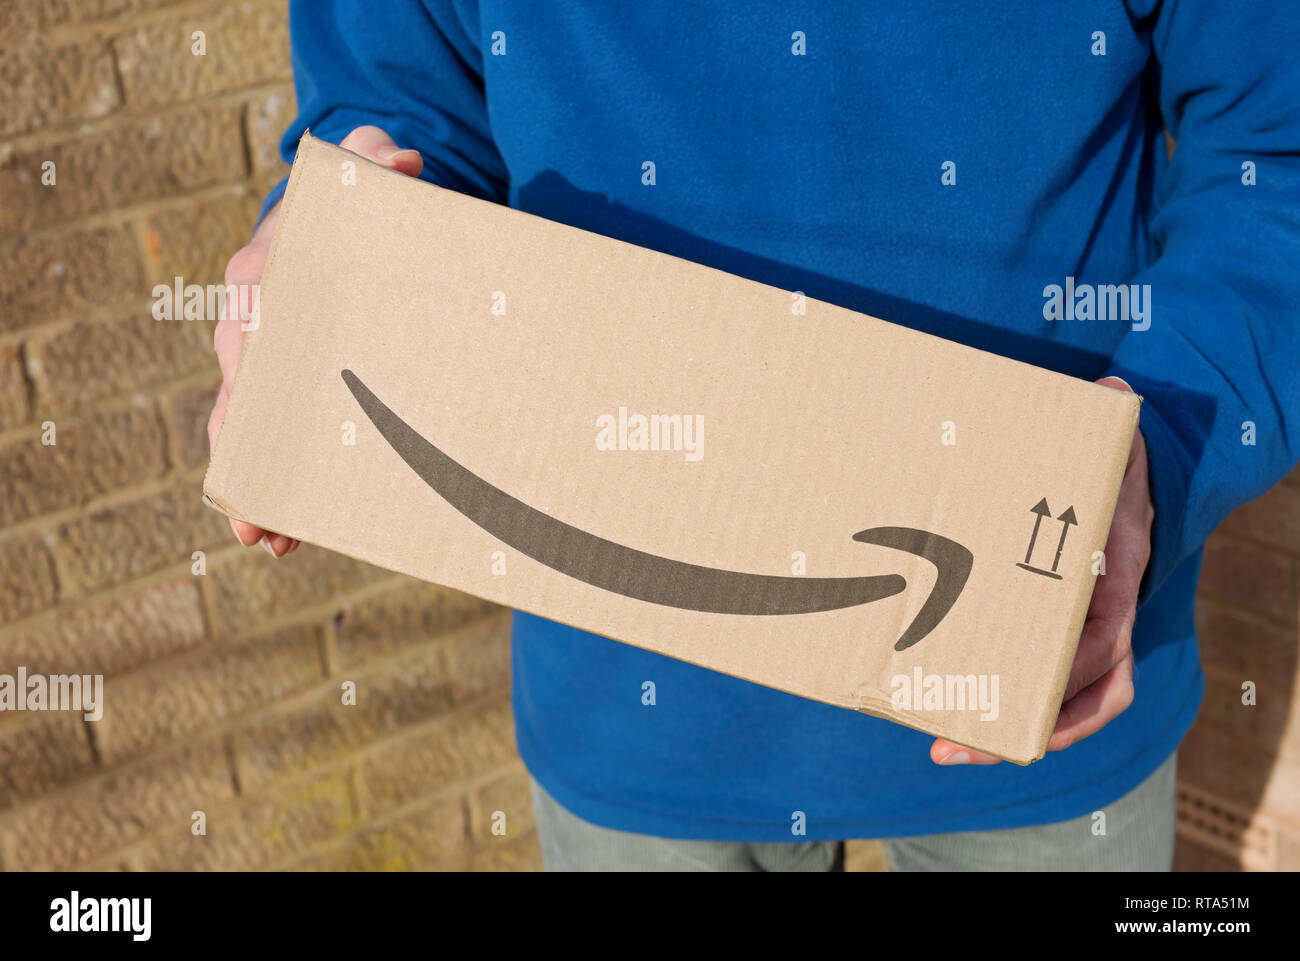 Close up of man person holding carrying Amazon box package delivery parcel home internet shopping England UK United Kingdom GB Great Britain Stock Photo